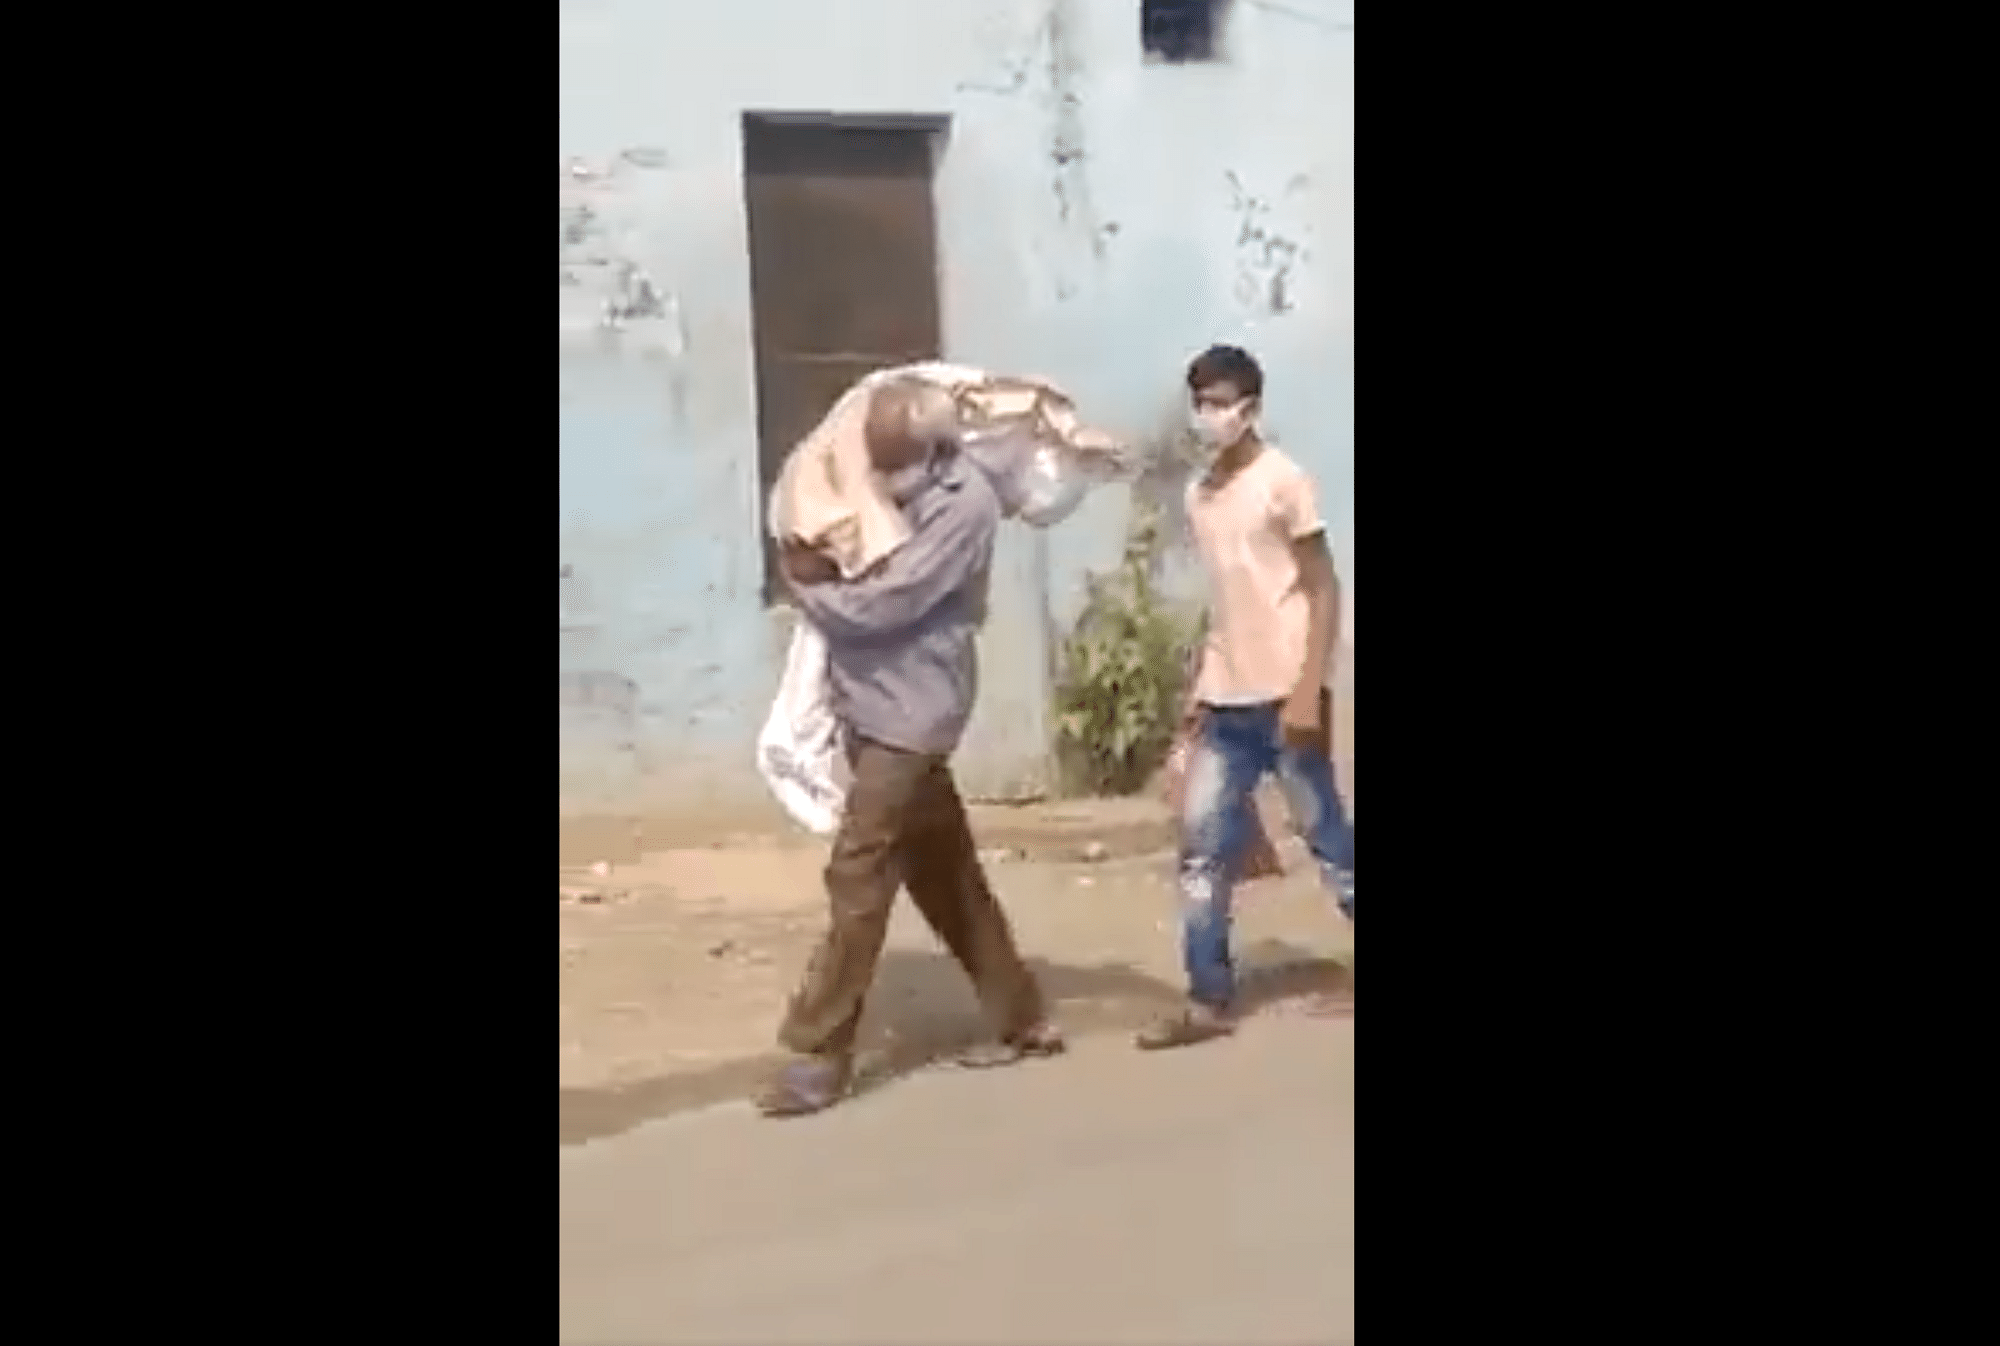 In a distressing incident, a man from a marginalised community carried his 11-year-old daughter’s body on his shoulders to reach a burial ground in Jalandhar town on Monday, 10 May.